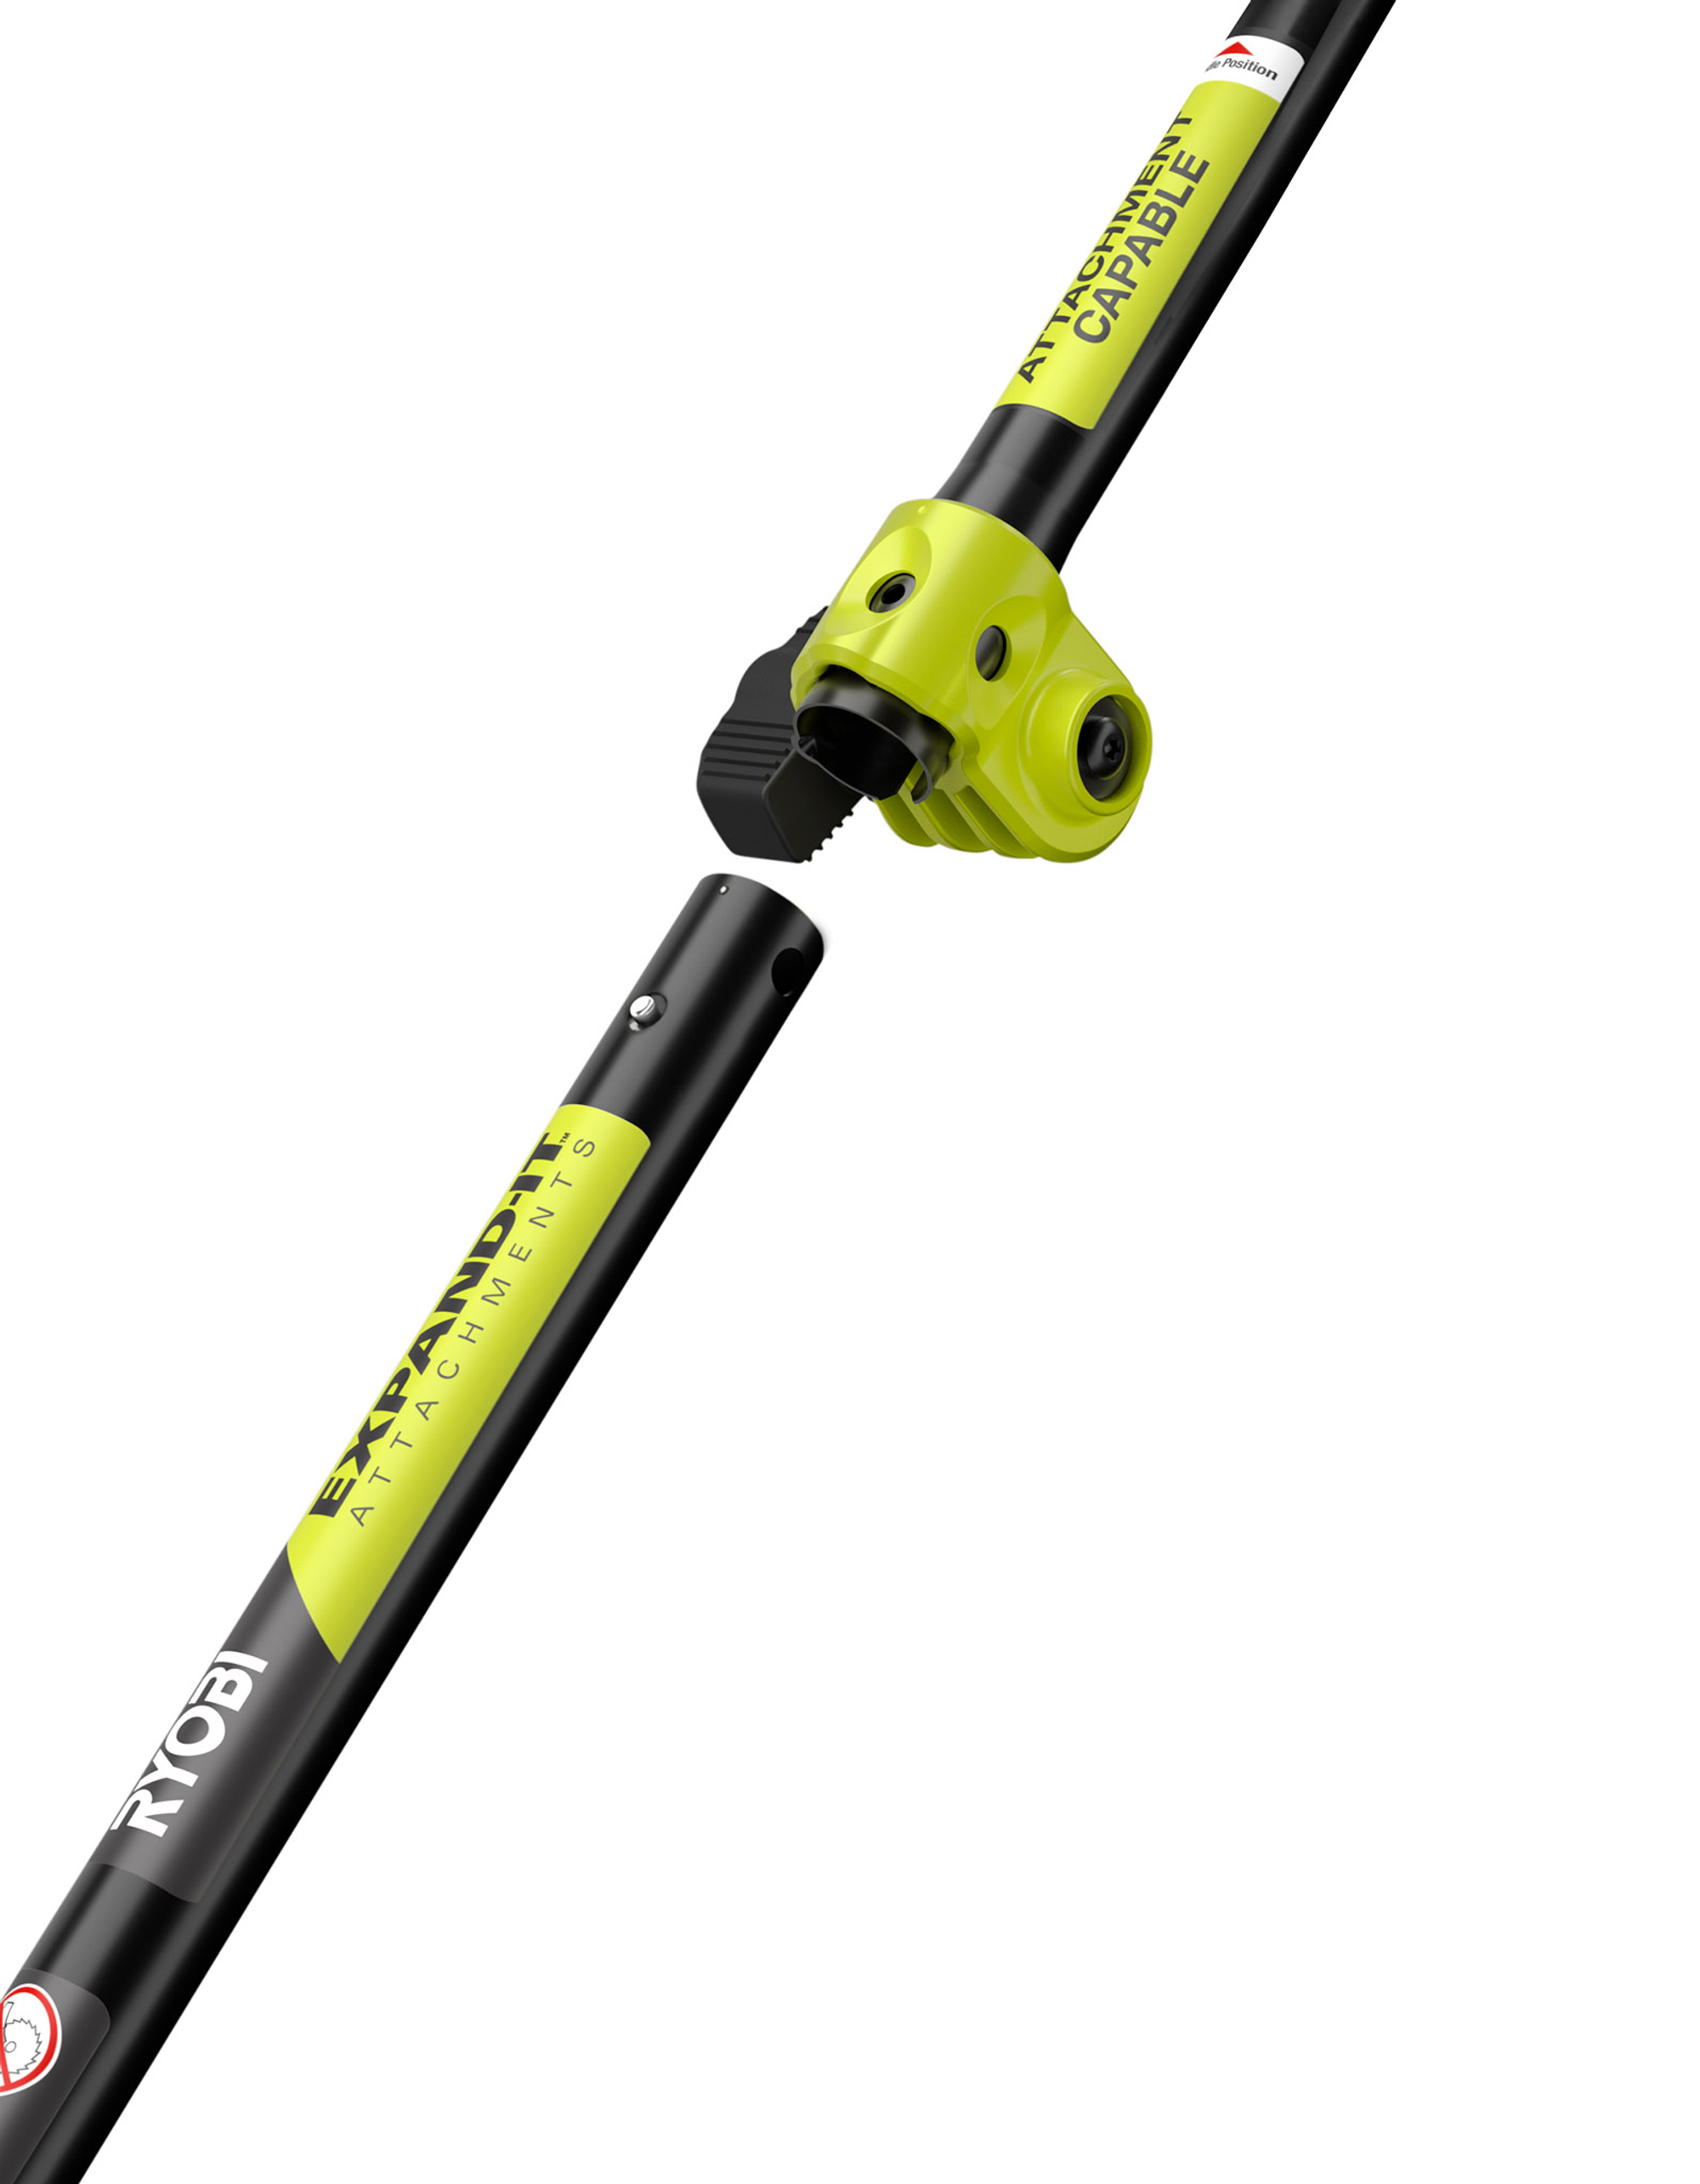 Product Features Image for 40V ATTACHMENT CAPABLE 15" STRING TRIMMER.